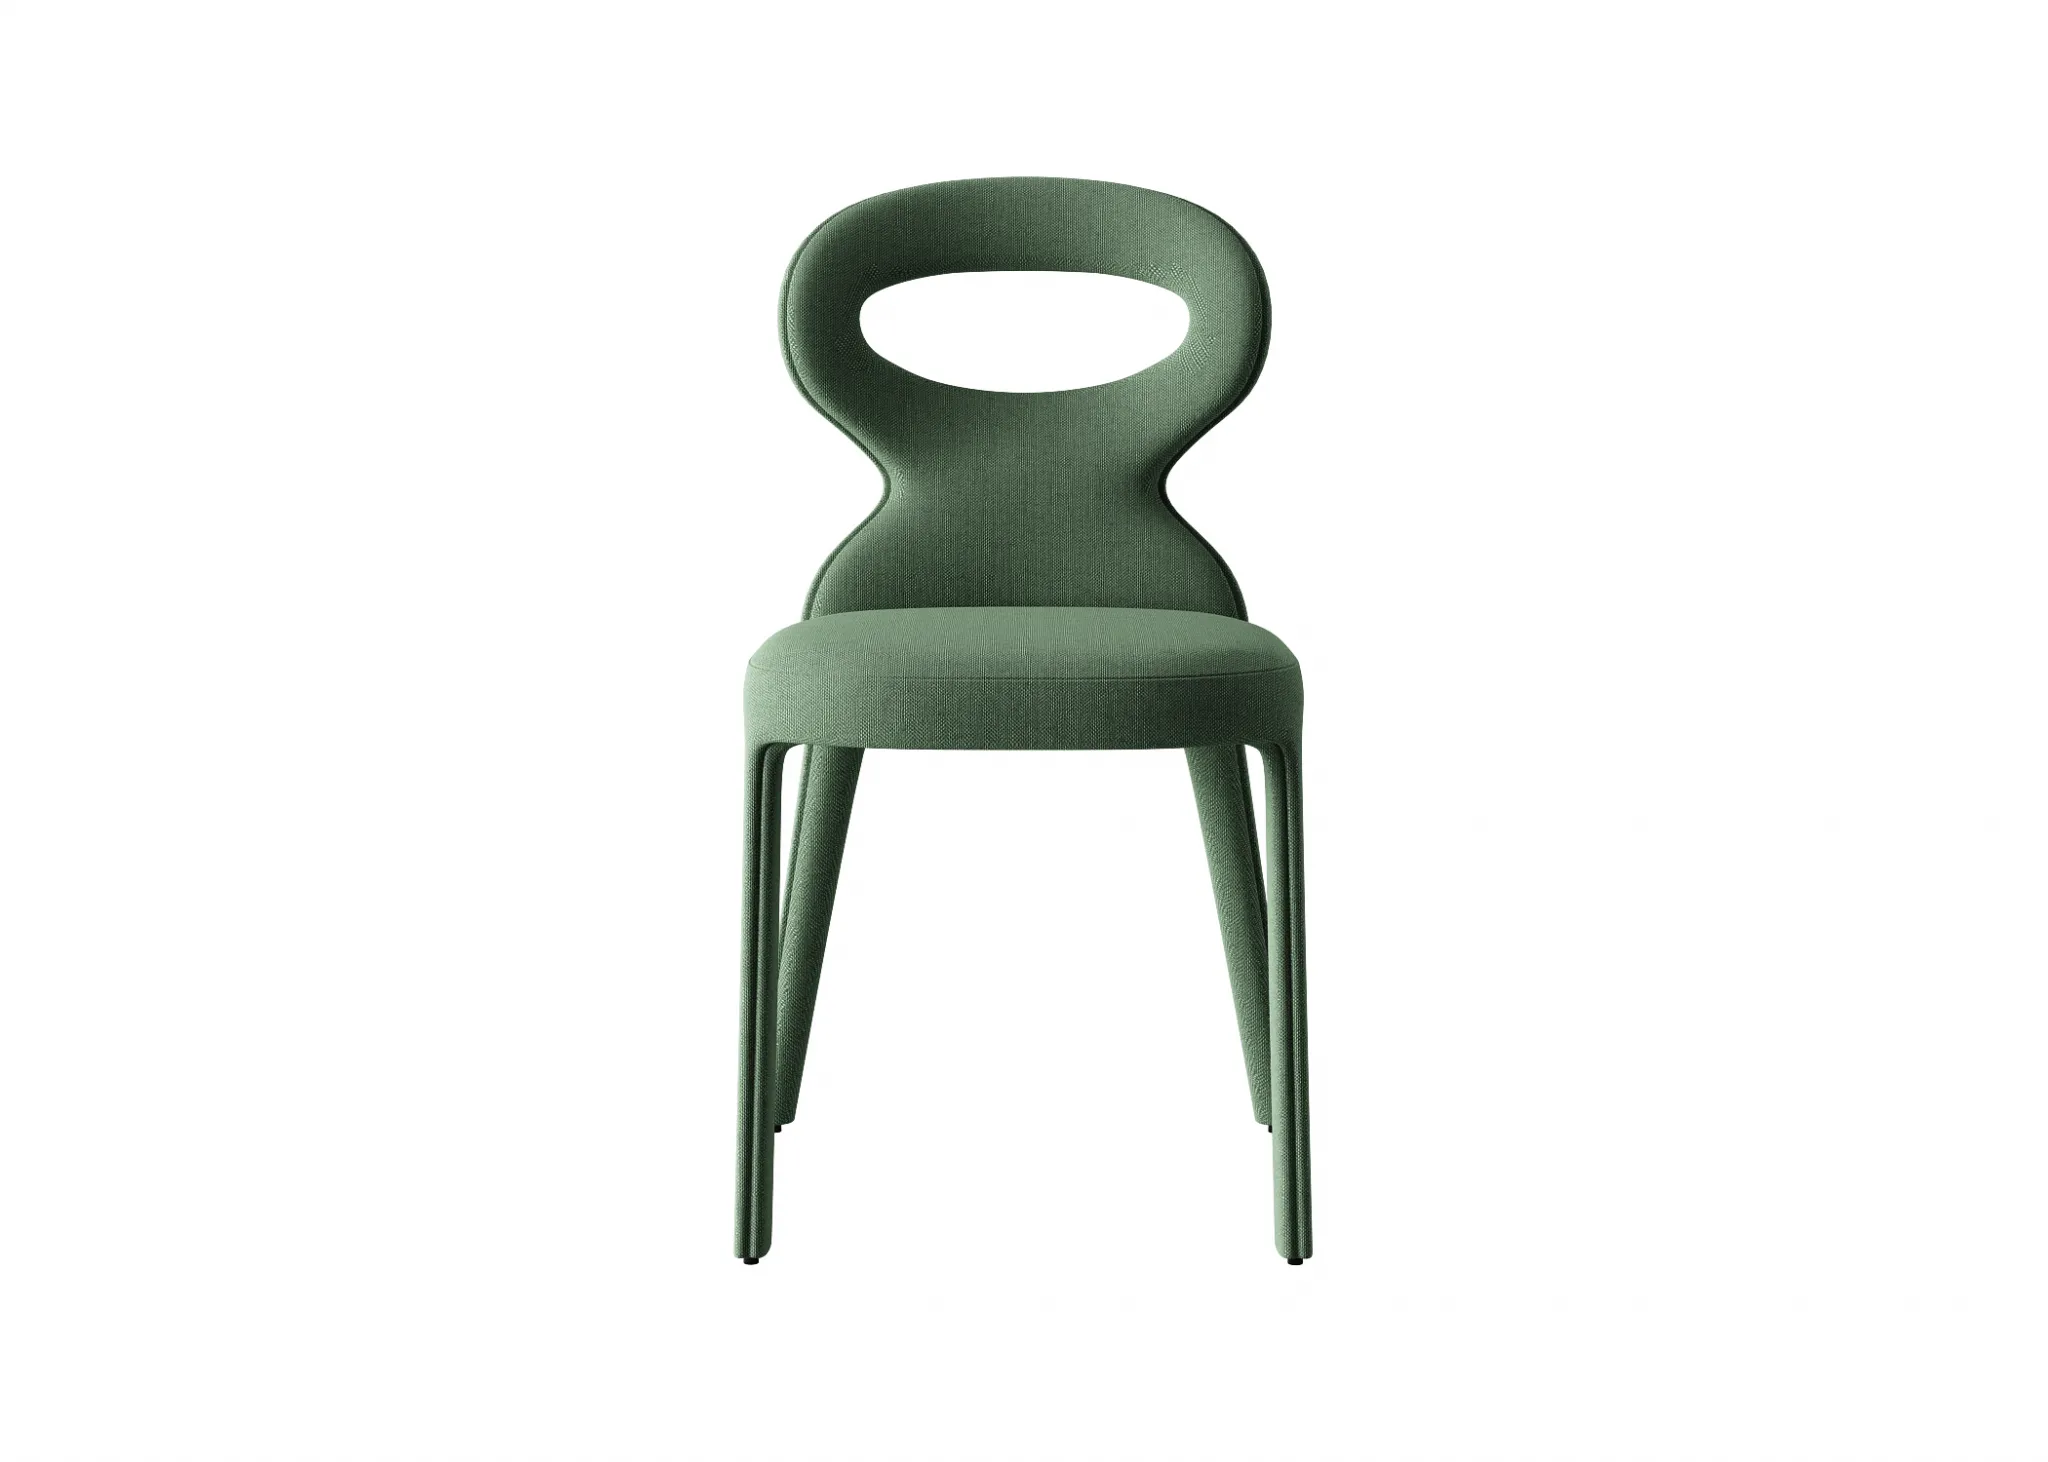 FURNITURE 3D MODELS – CHAIRS – 0395